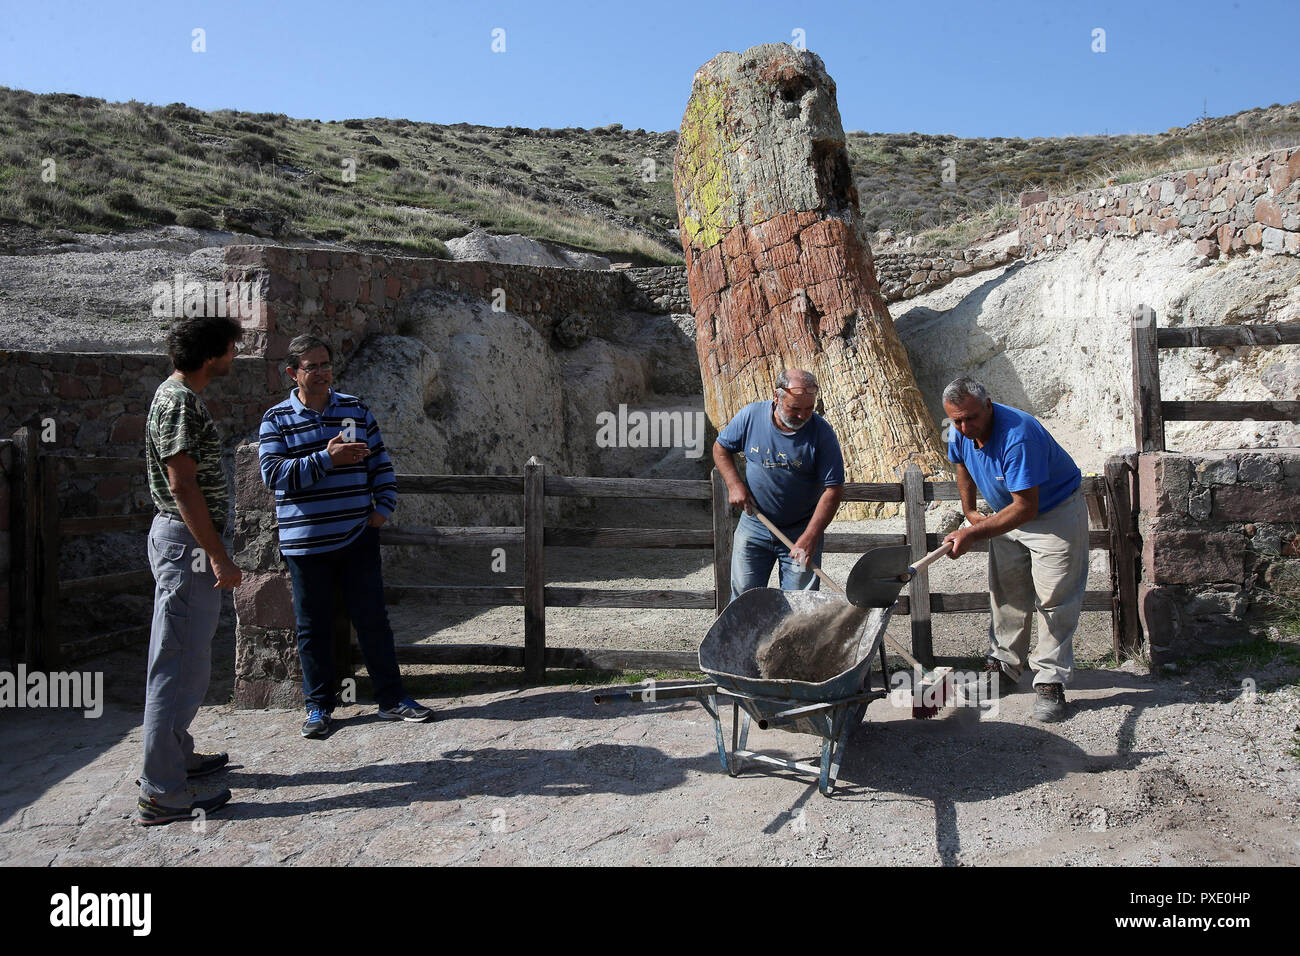 (181021) -- LESVOS ISLAND (GREECE), Oct. 21, 2018 (Xinhua) -- Nickolas Zouros (2nd L), President of the Global Geoparks Network and Director of the Natural History Museum of Lesvos Petrified Forest, speaks to workers during restoration work in the Petrified Forest near Sigri village, Lesvos island, Greece on Oct. 20, 2018. The entire Lesvos island in the northeastern Aegean Sea has been designated as one of the 140 UNESCO Global Geoparks worldwide on account of its outstanding geological, cultural and ecological heritage and efforts to preserve and promote it over the past three decades. (Xinh Stock Photo